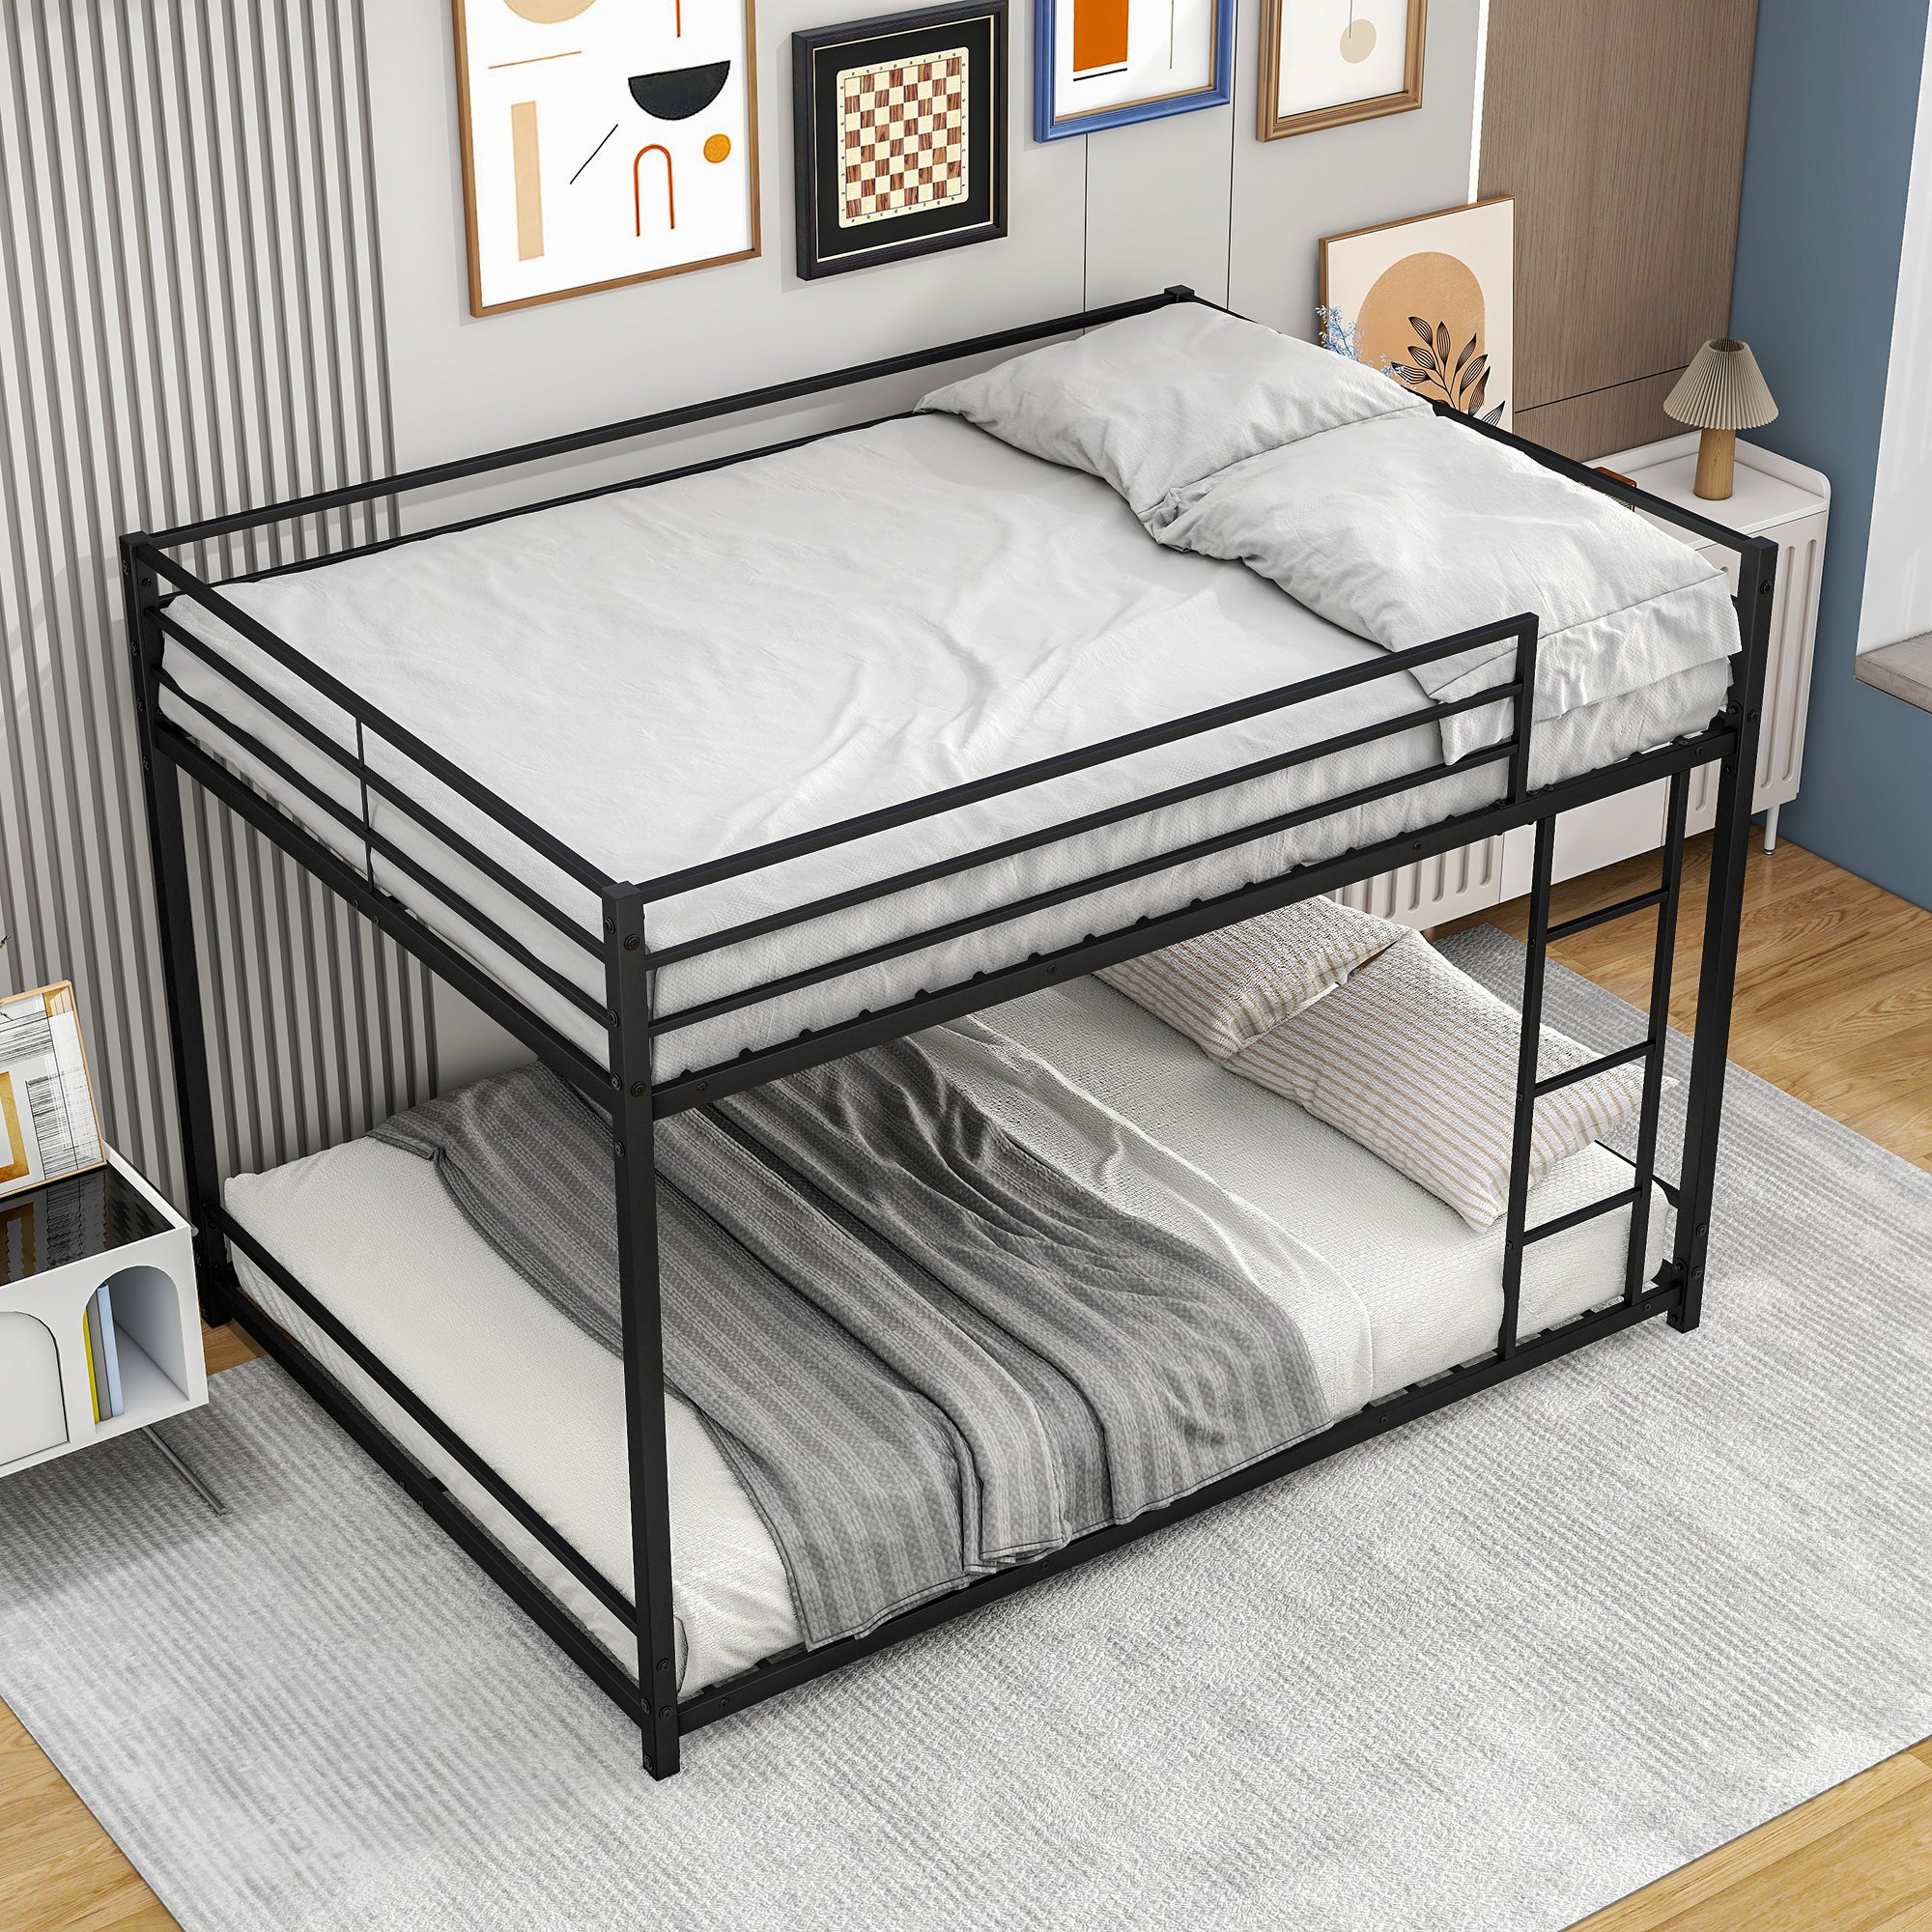 Bellemave® Full Size Metal Bunk Bed with Safety Guard Rails Bellemave®